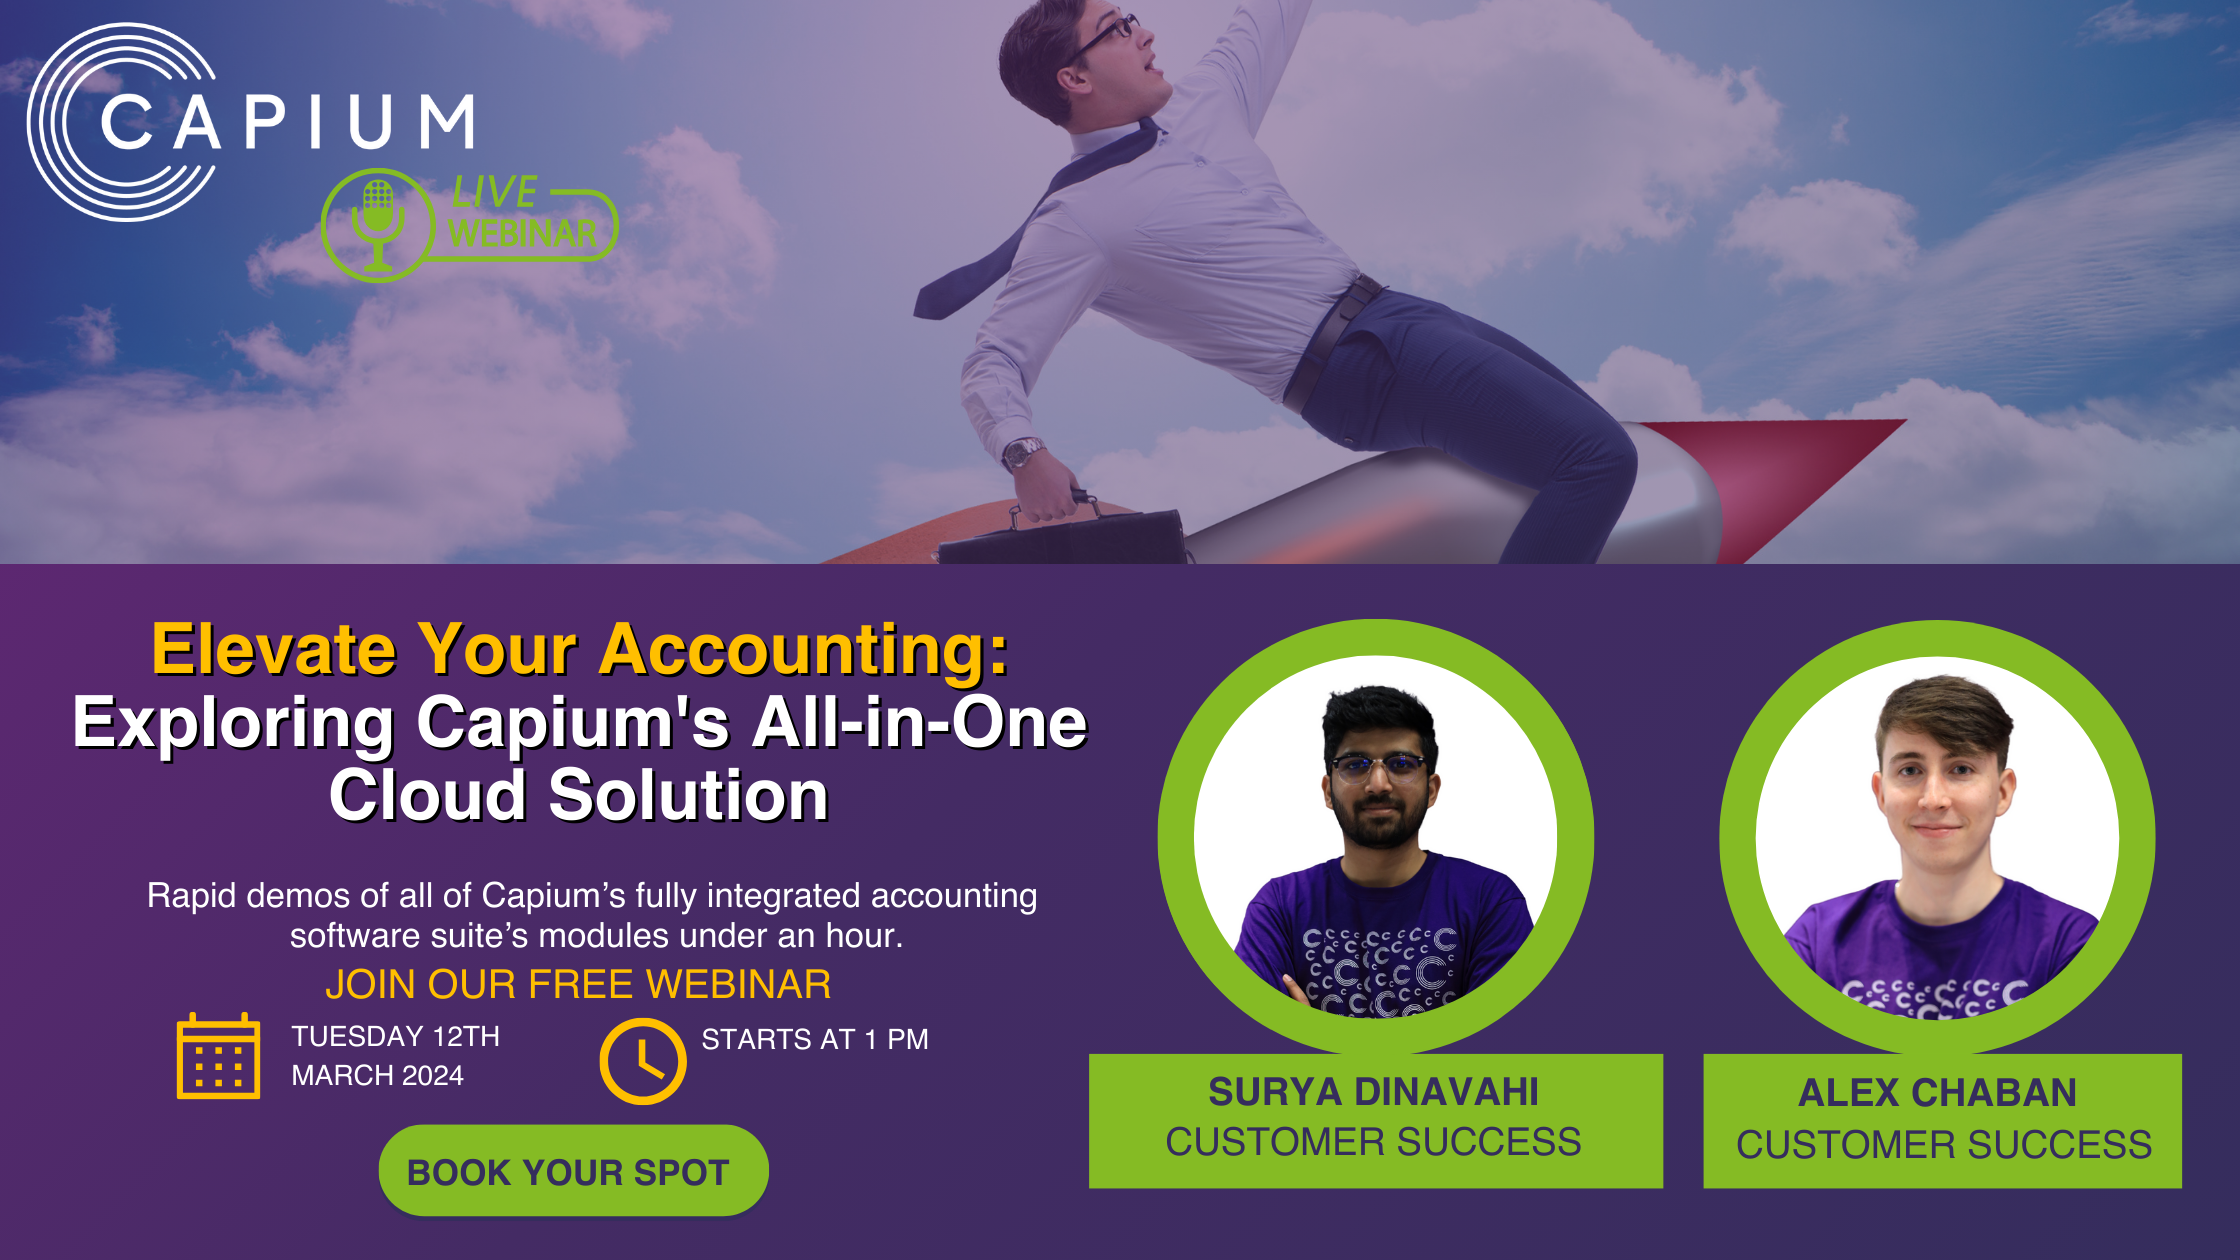 Elevate Your Accounting: Exploring Capium's All-in-One Cloud Solution logo